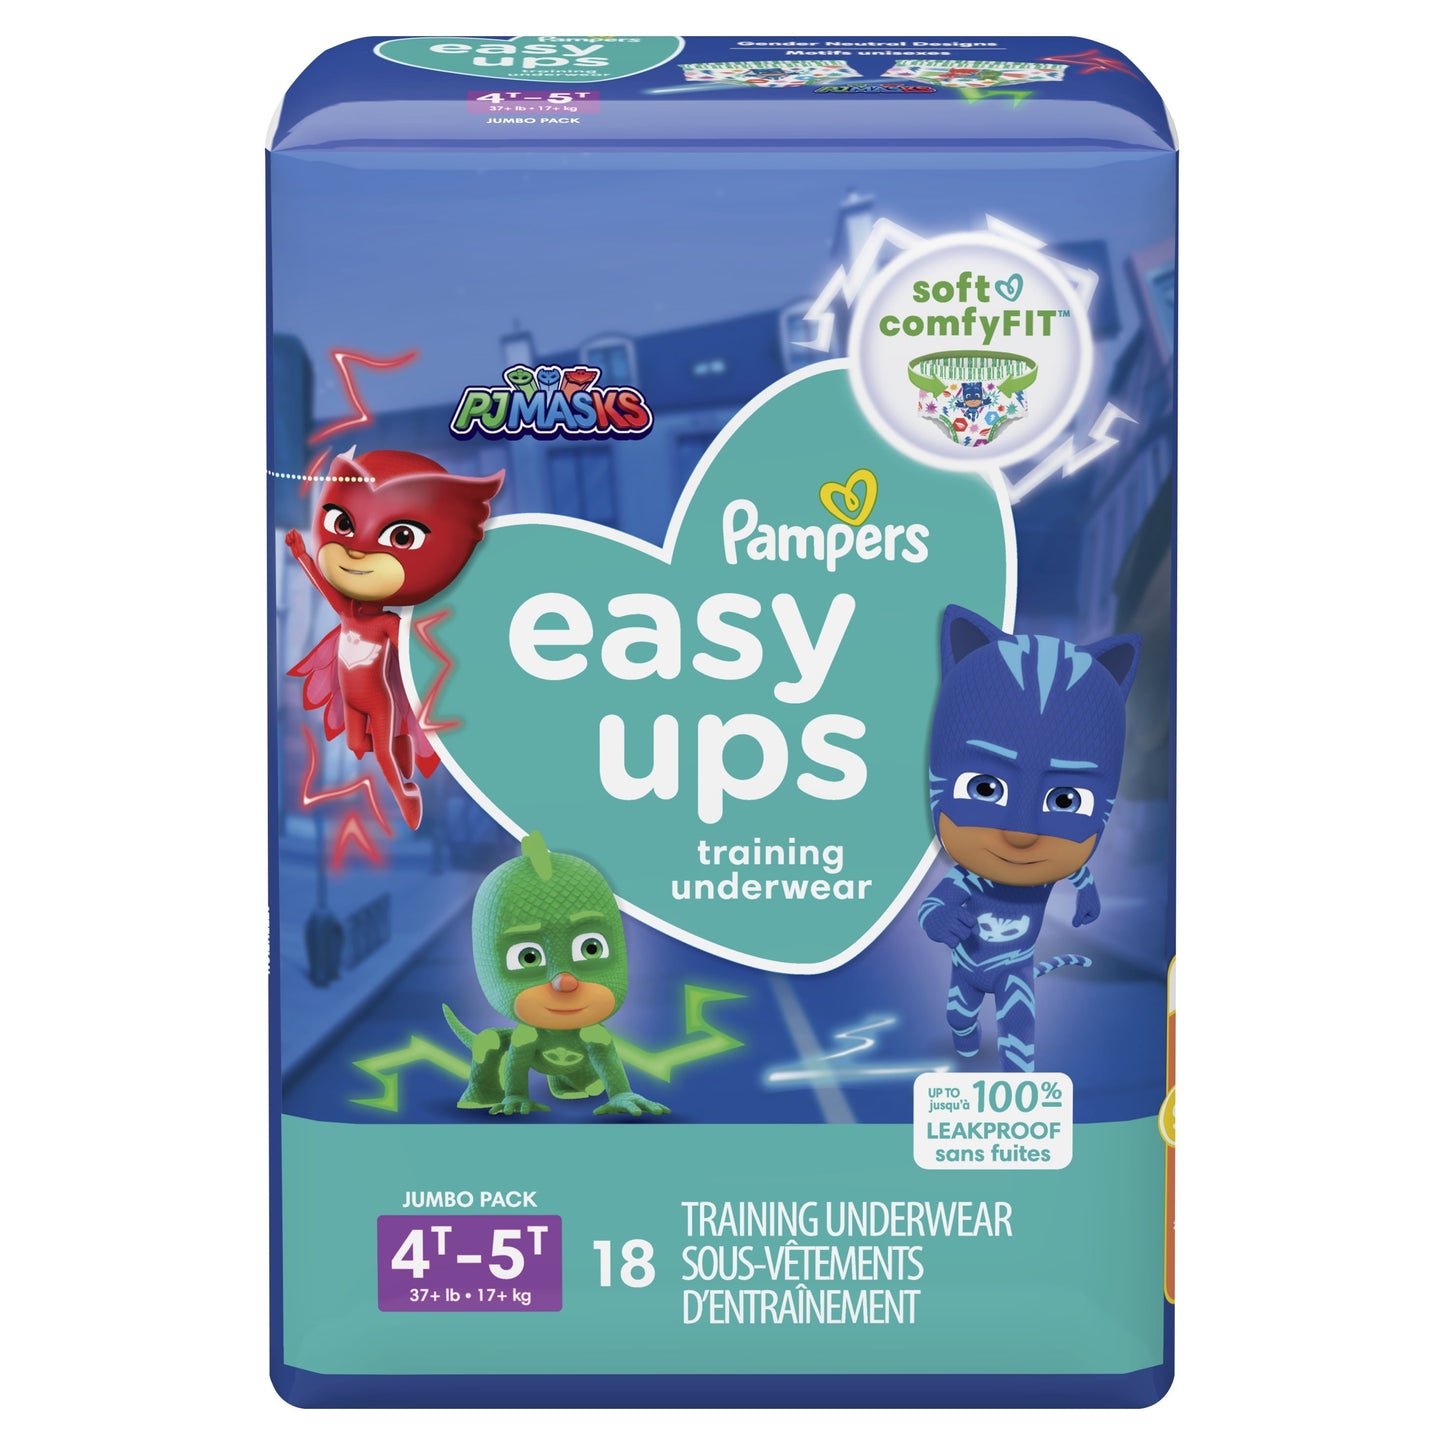 Pampers Easy Ups PJ Masks Training Pants Toddler Boys Size 4T/5T 18 Count